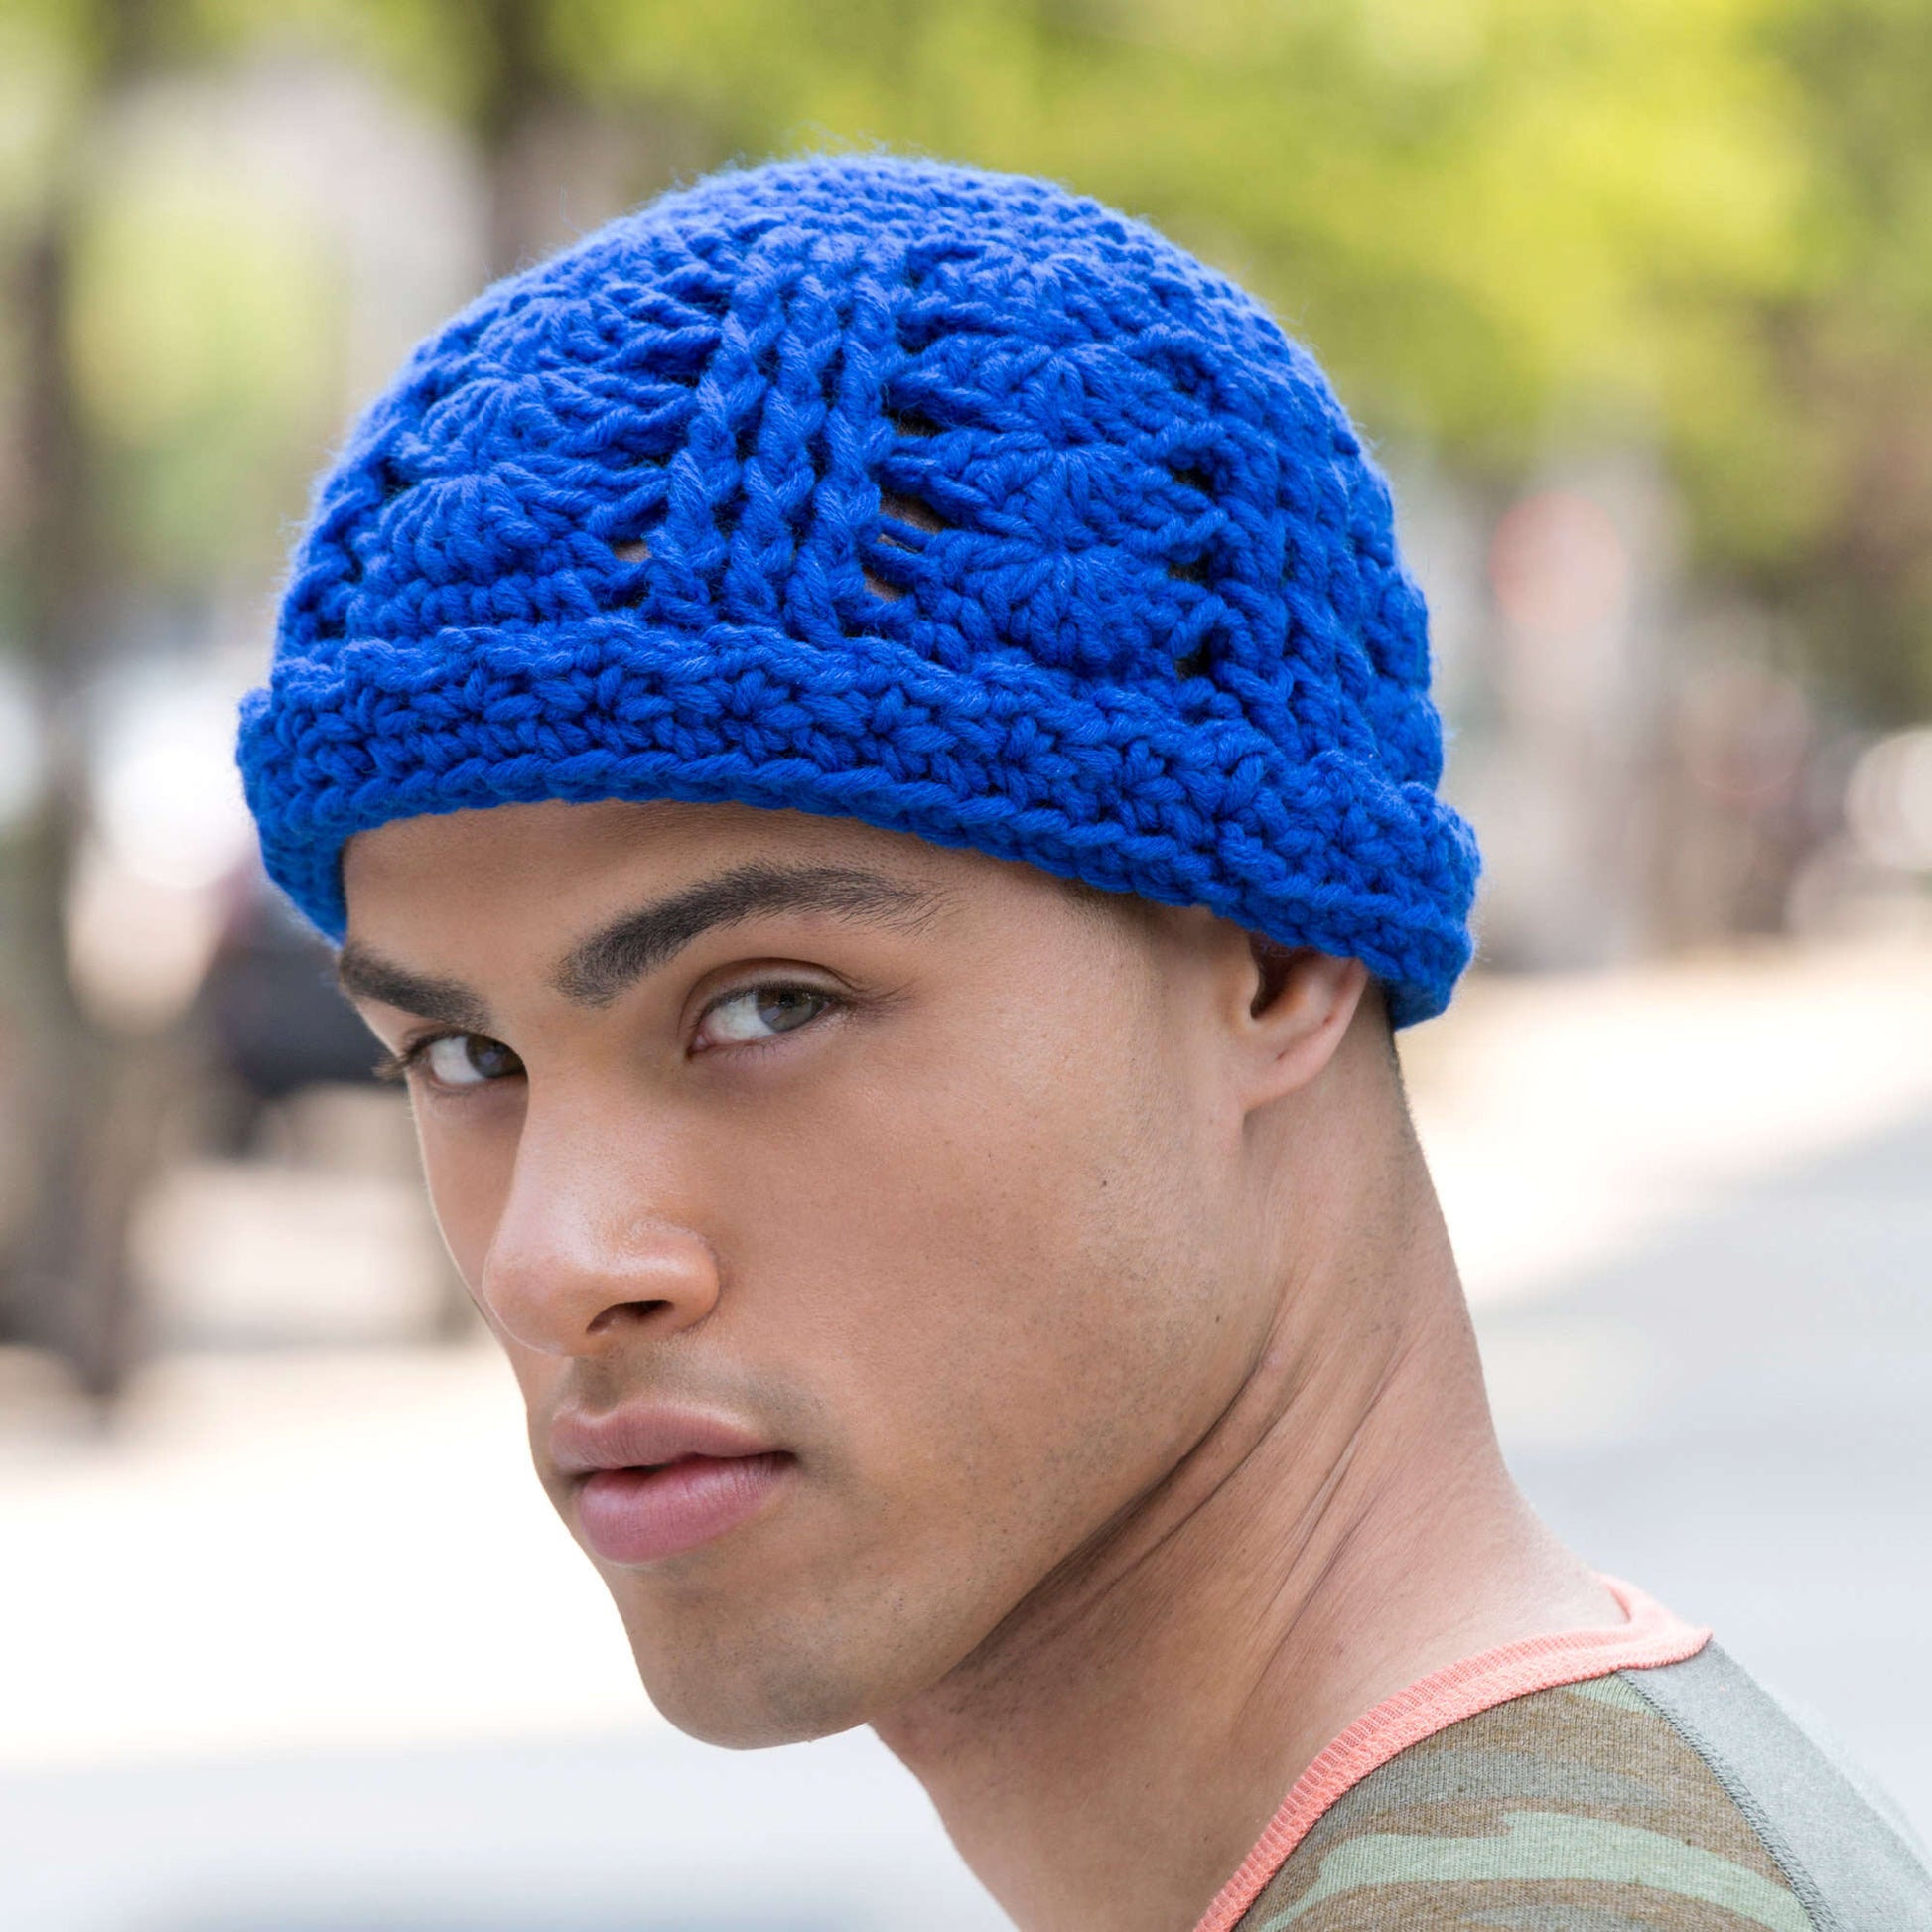 Free Red Heart Beanie With A Dash Crochet Pattern